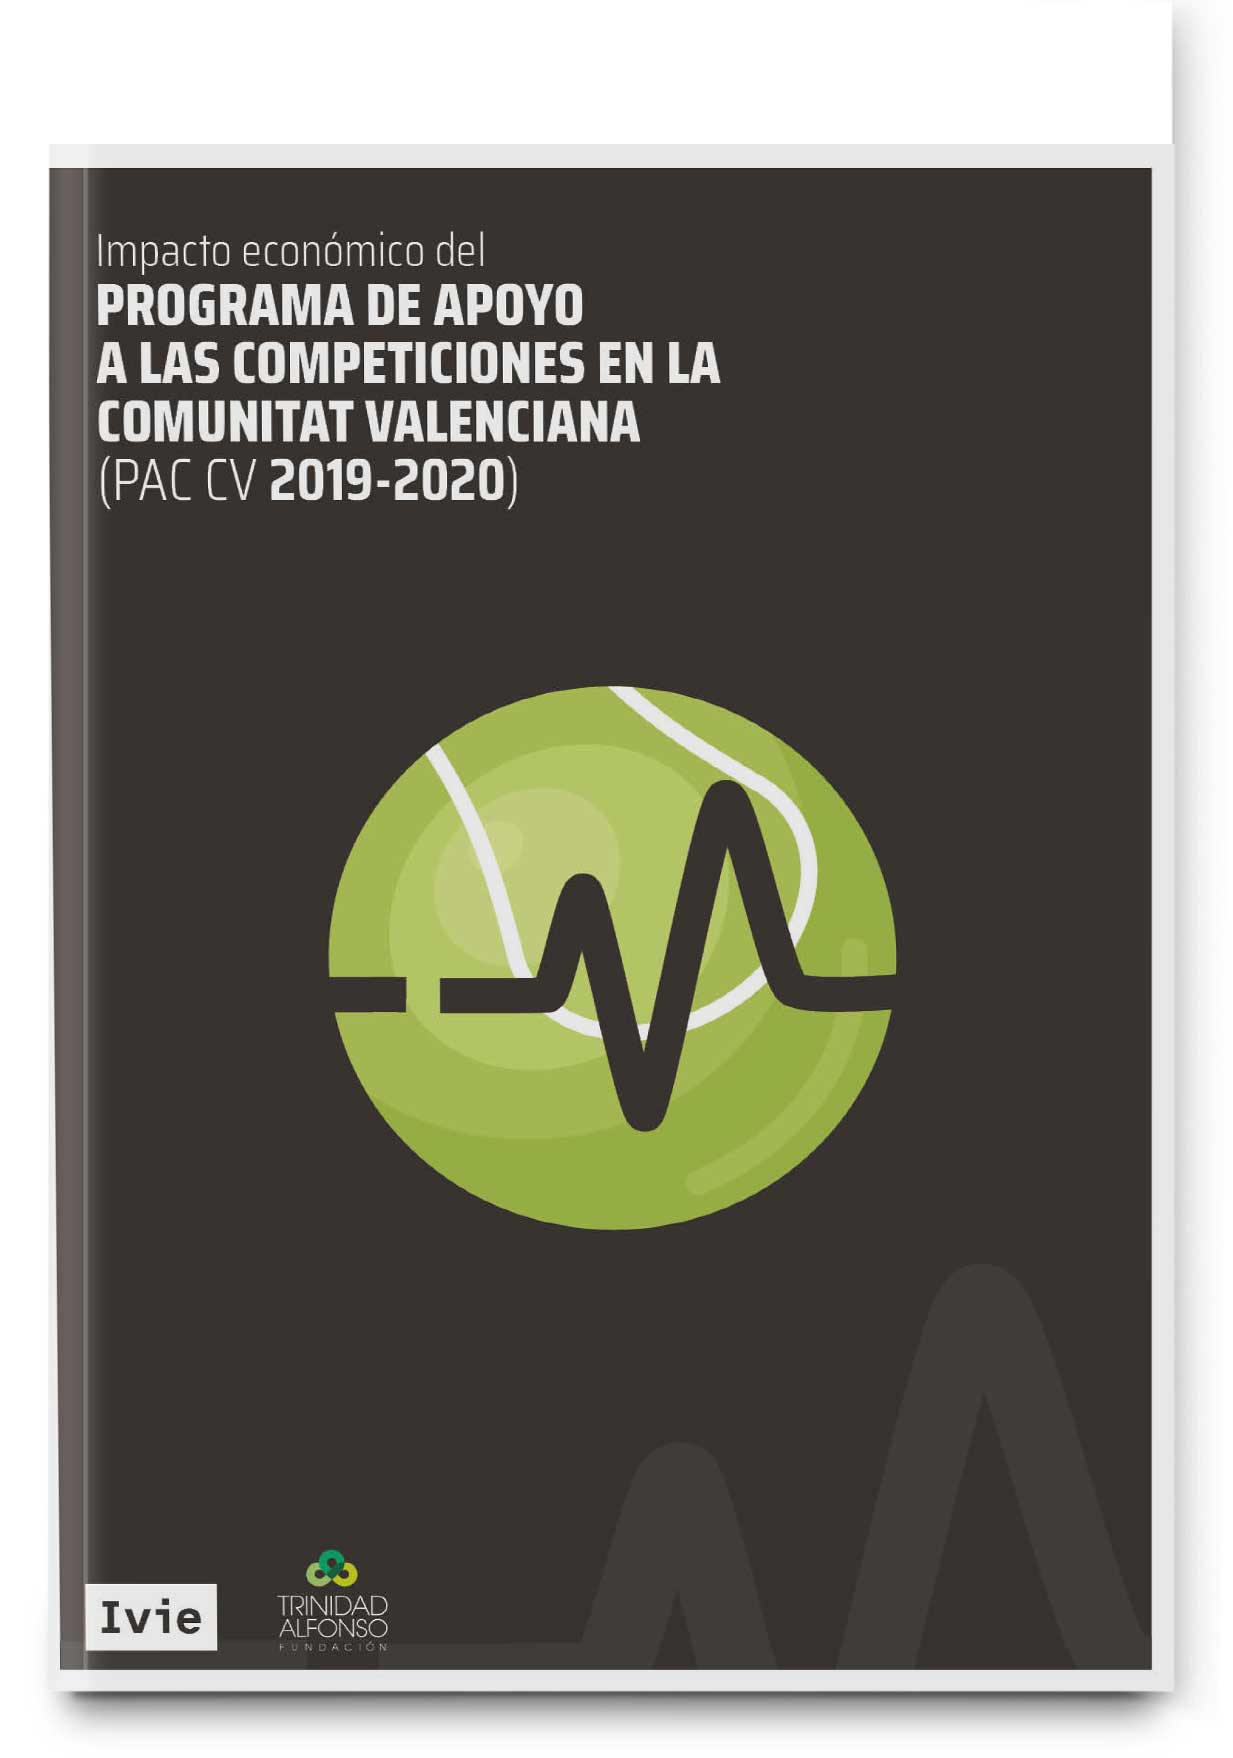 Economic impact of the Trinidad Alfonso Foundation Program to Support Sports Competitions in the Valencian Community. 4th edition